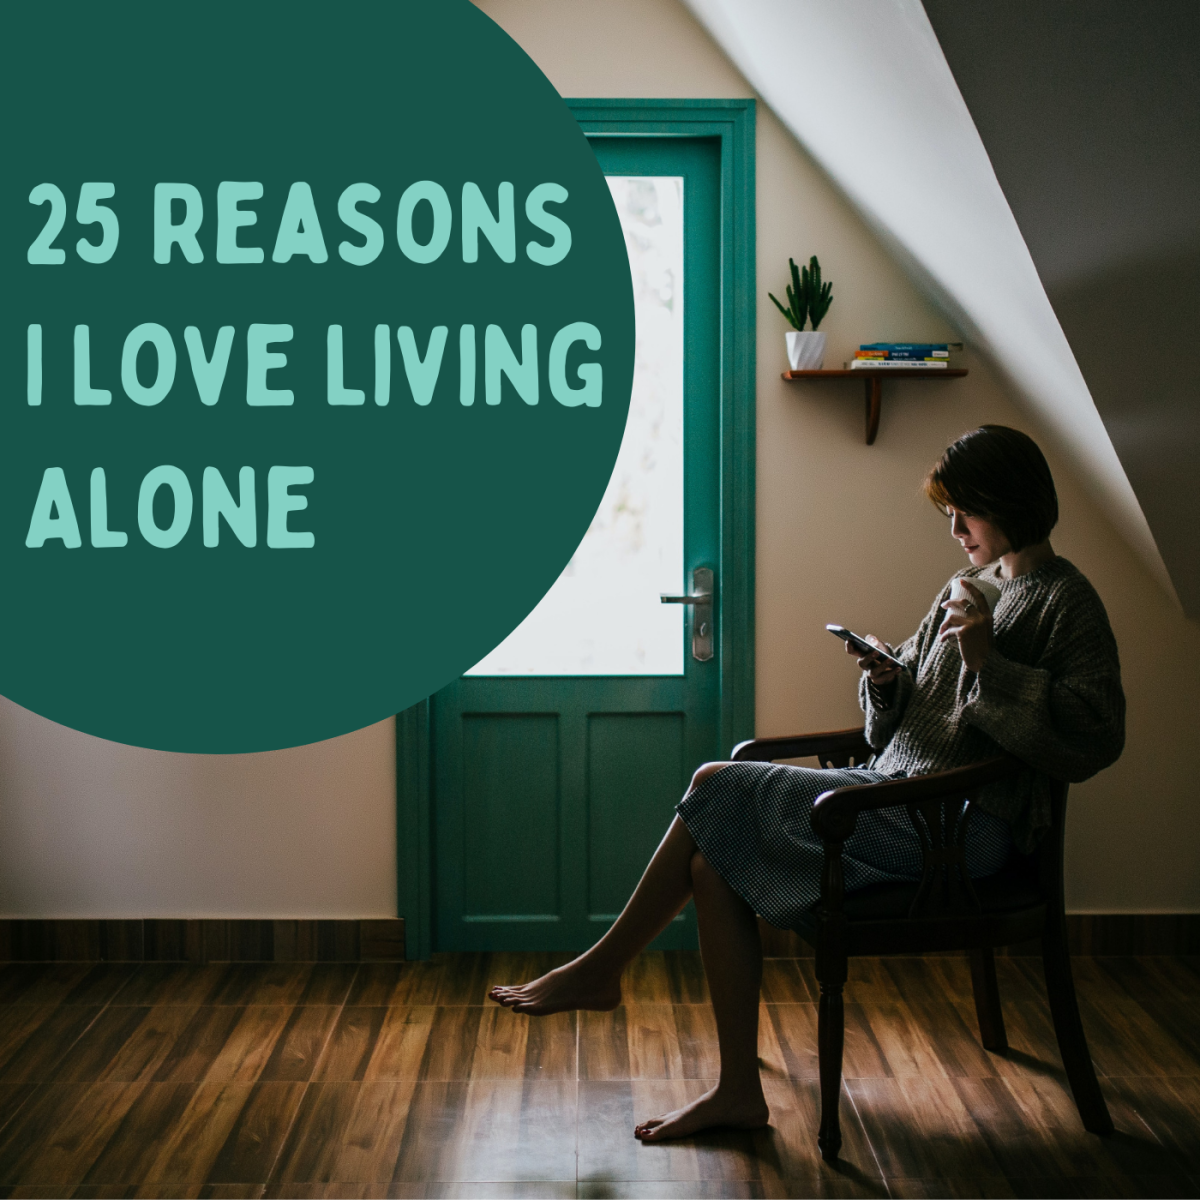 Many people are choosing to live alone.